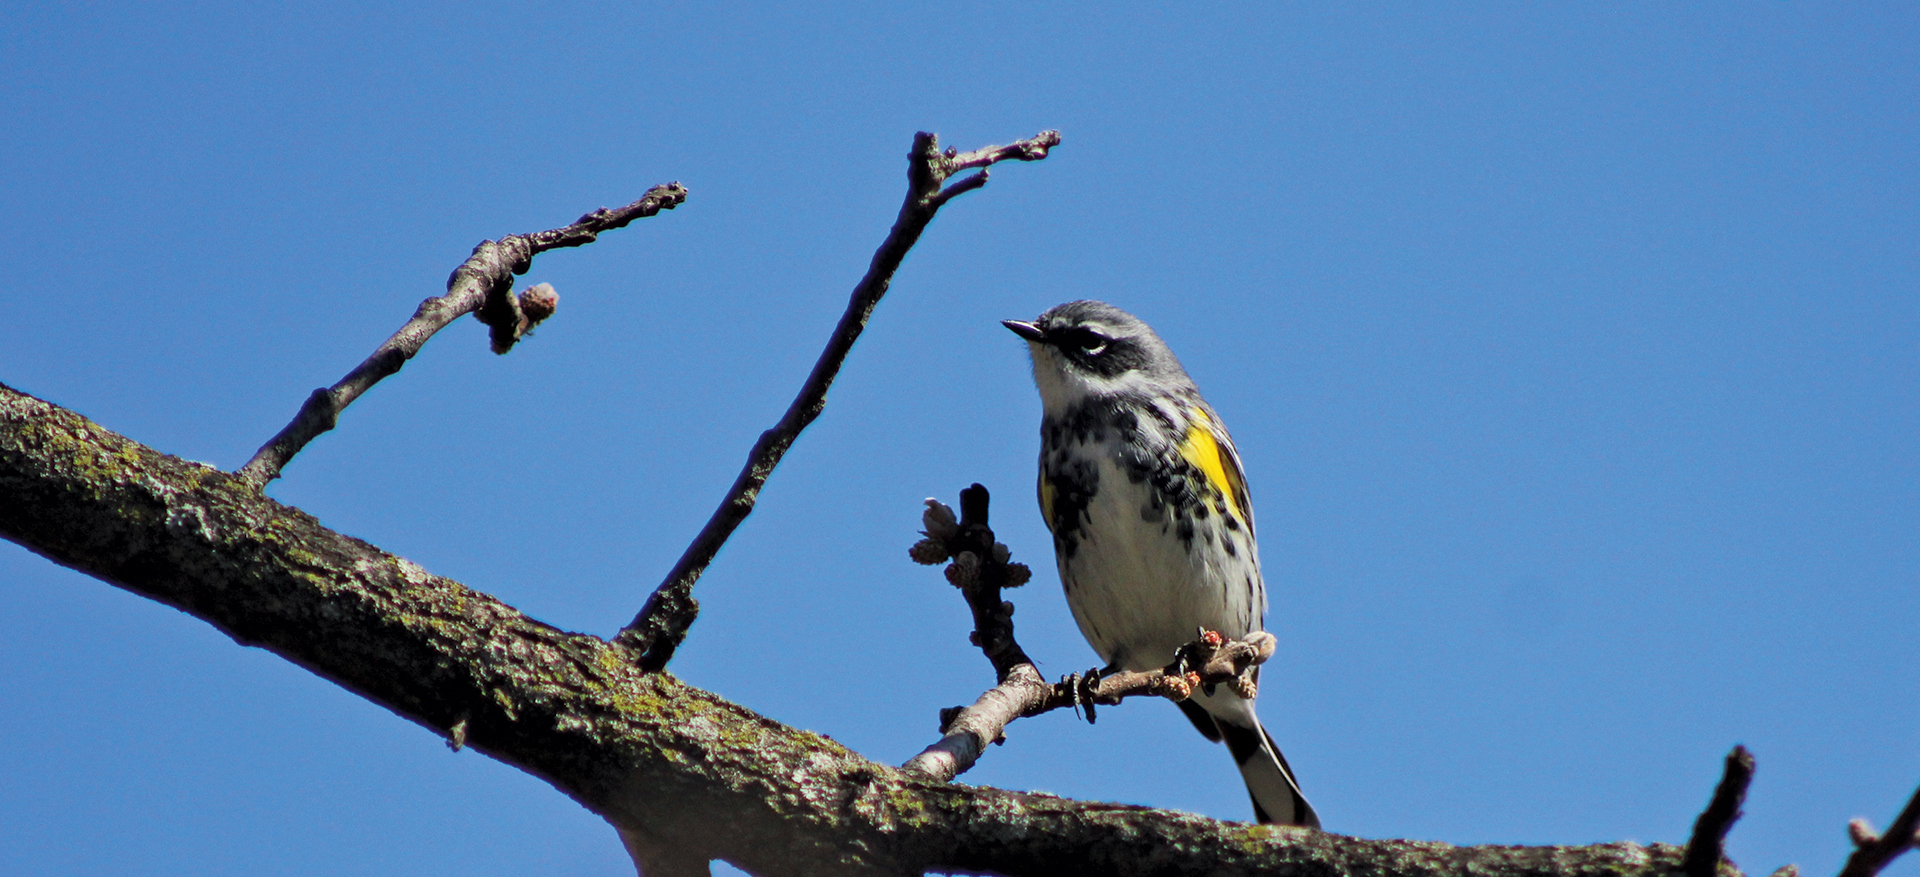 Photograph of a Yellow Rumped Warbler on a tree limb